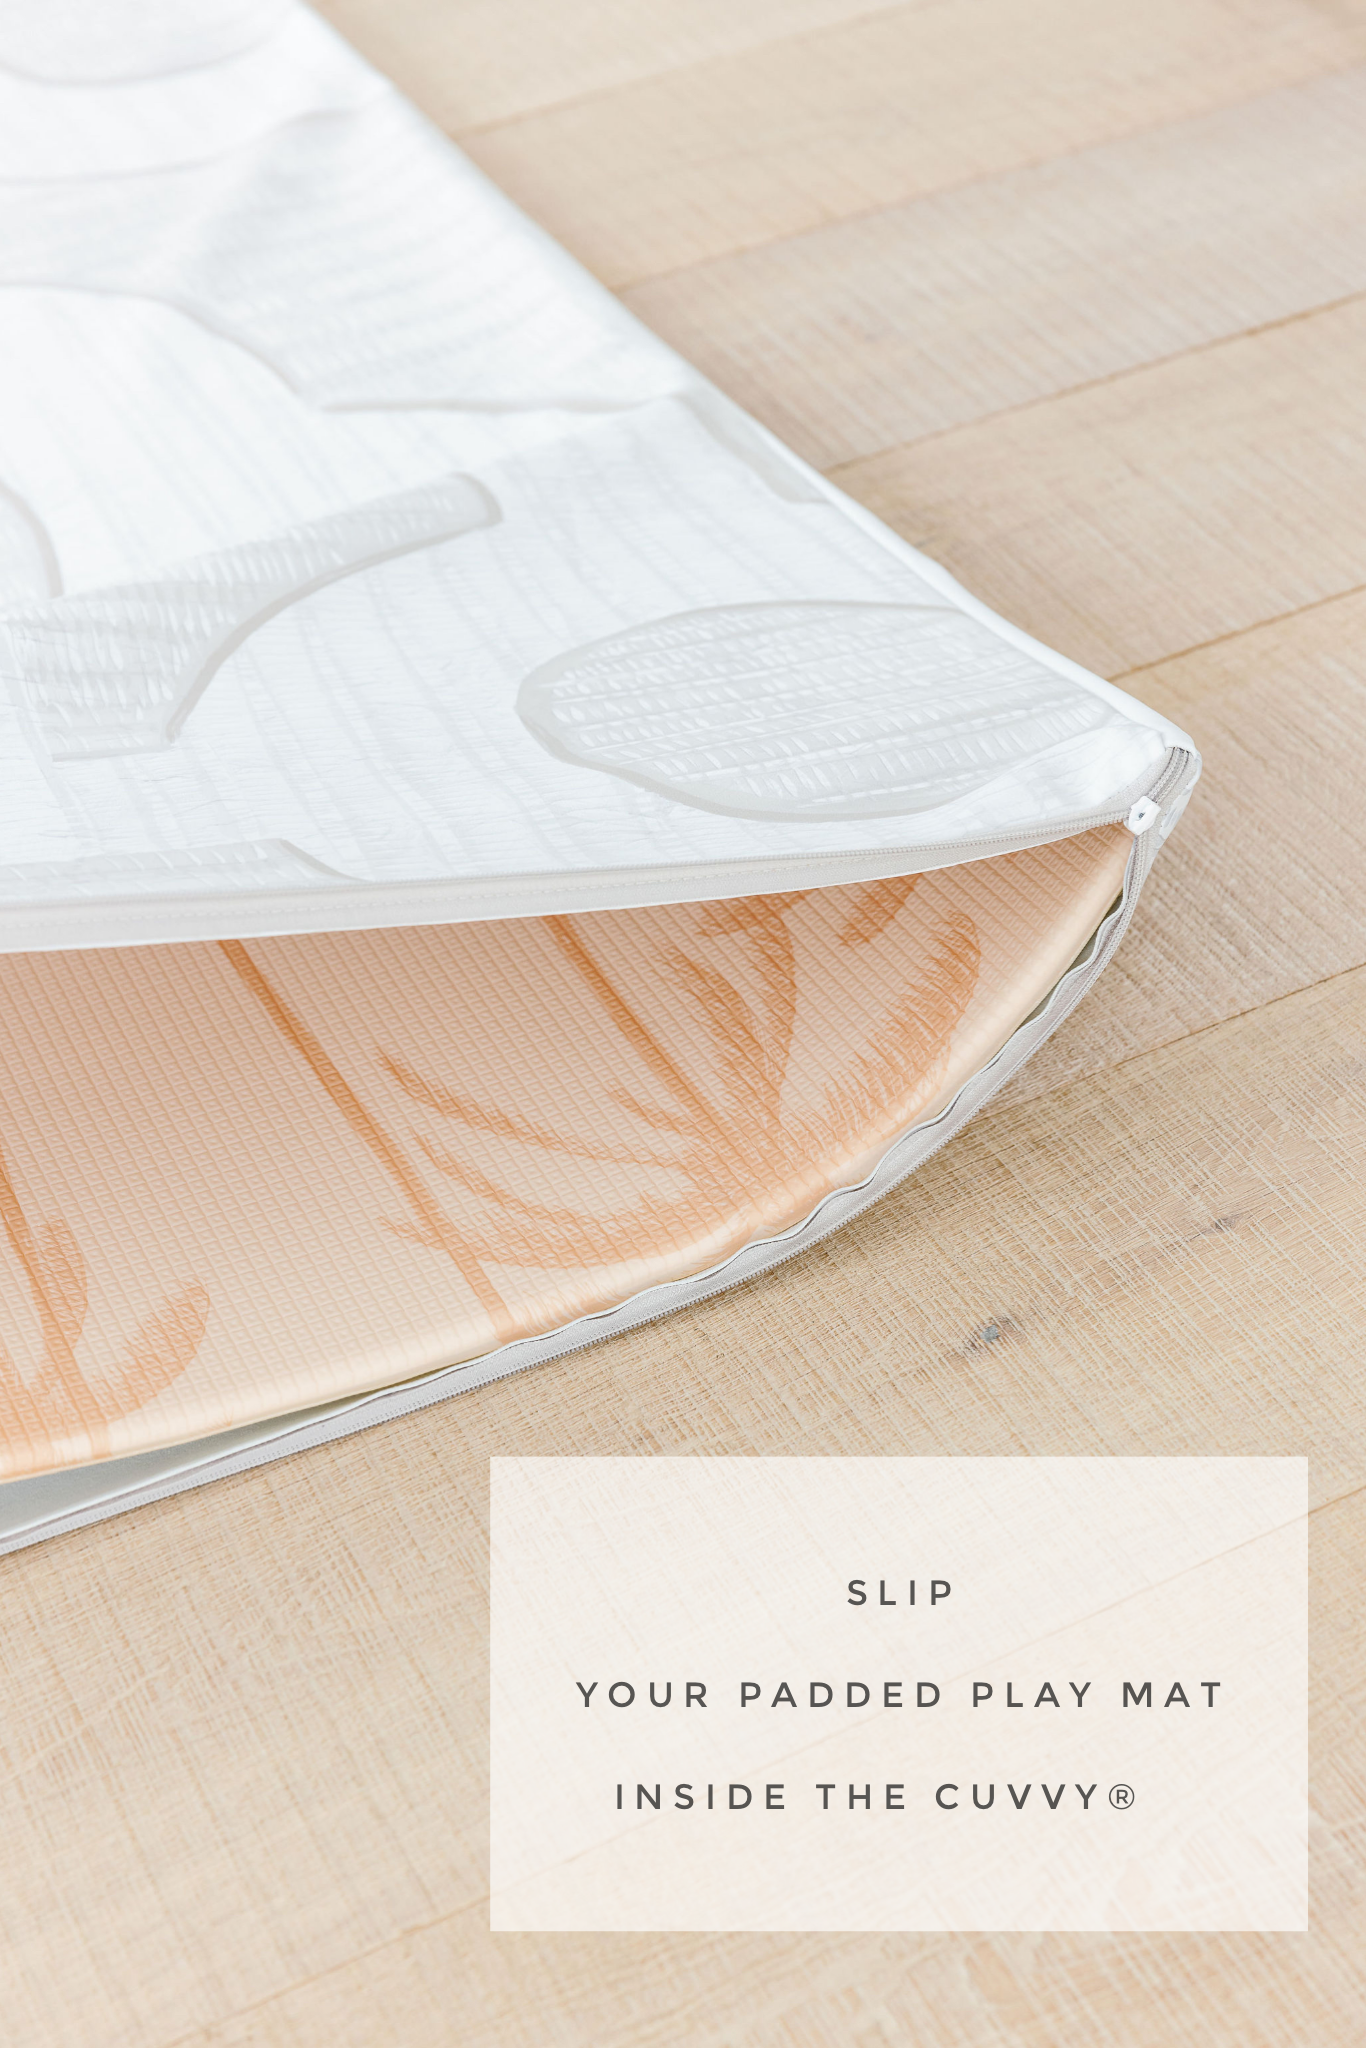 Softly Summer Cuvvy play mat cover, padded play mat, vegan leather, reversible, road play mat, palm , baby play mat